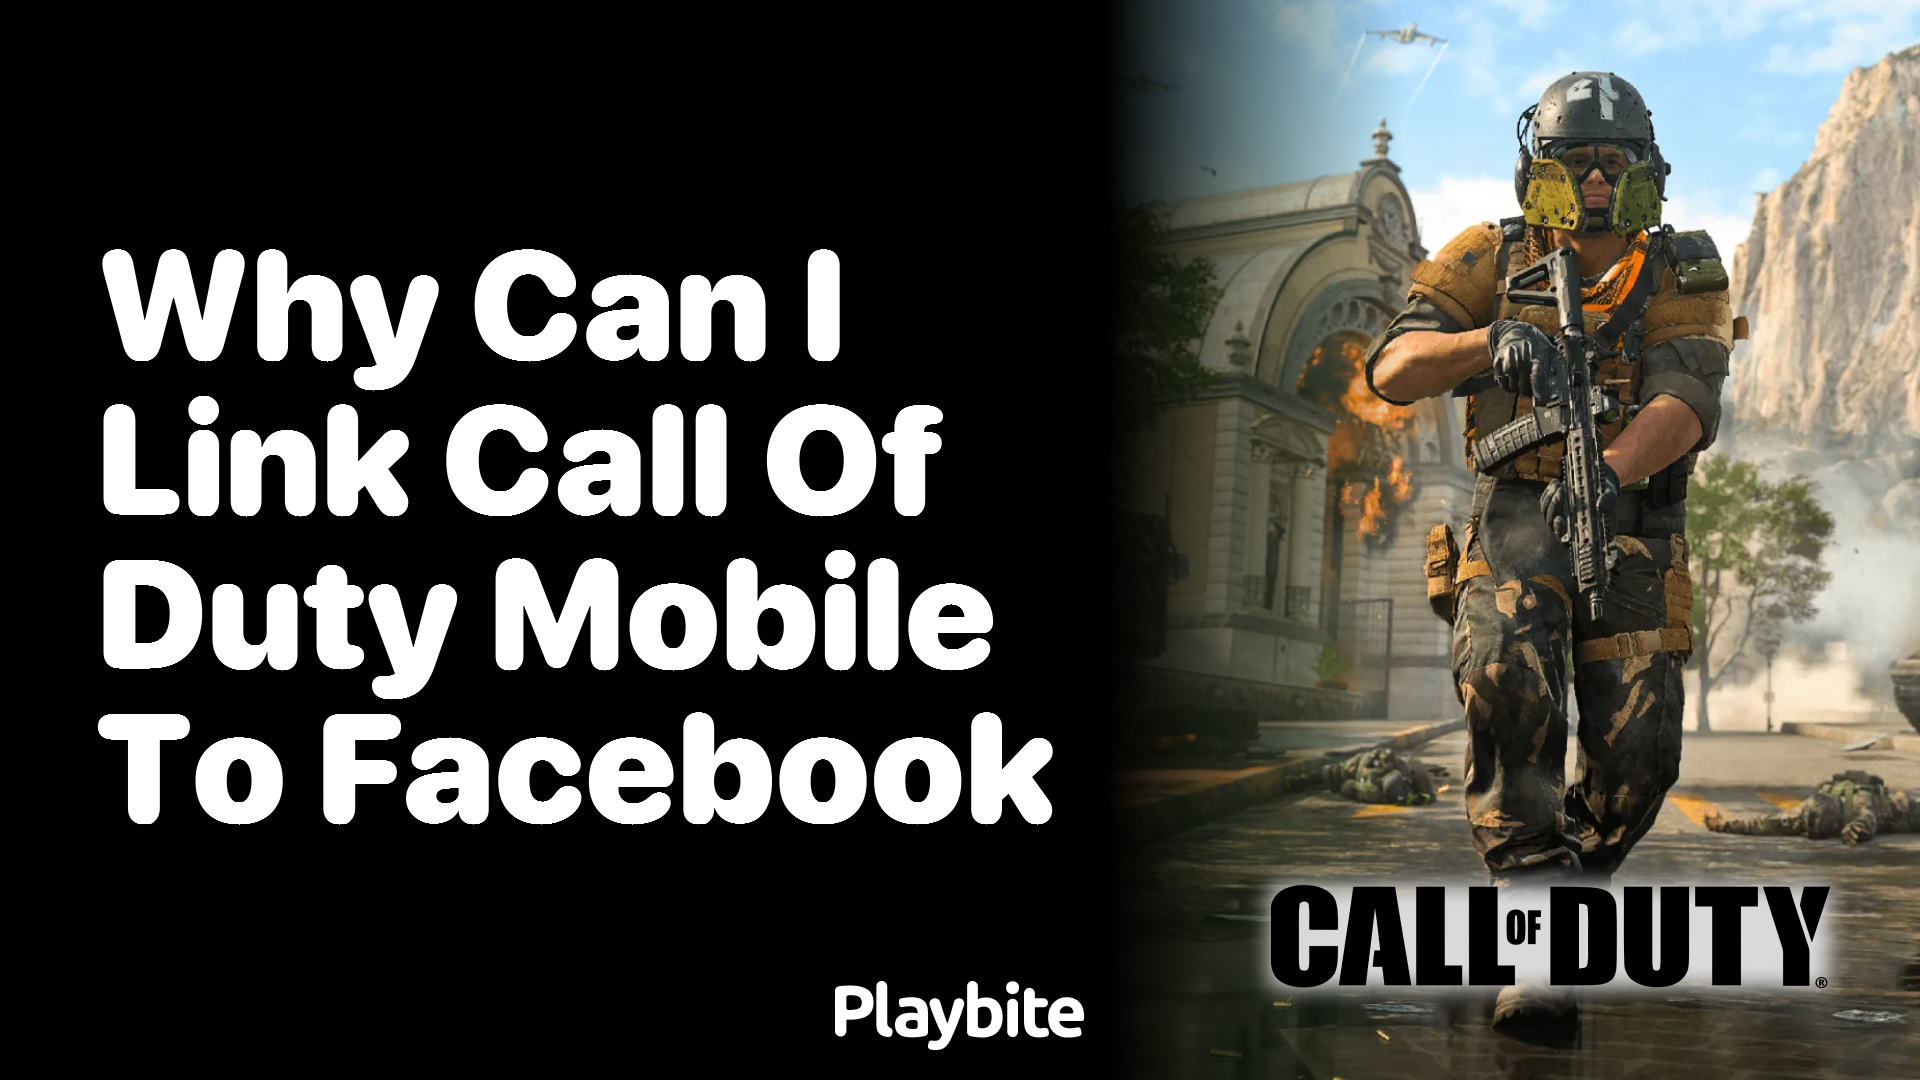 Why Can I Link Call of Duty Mobile to Facebook?